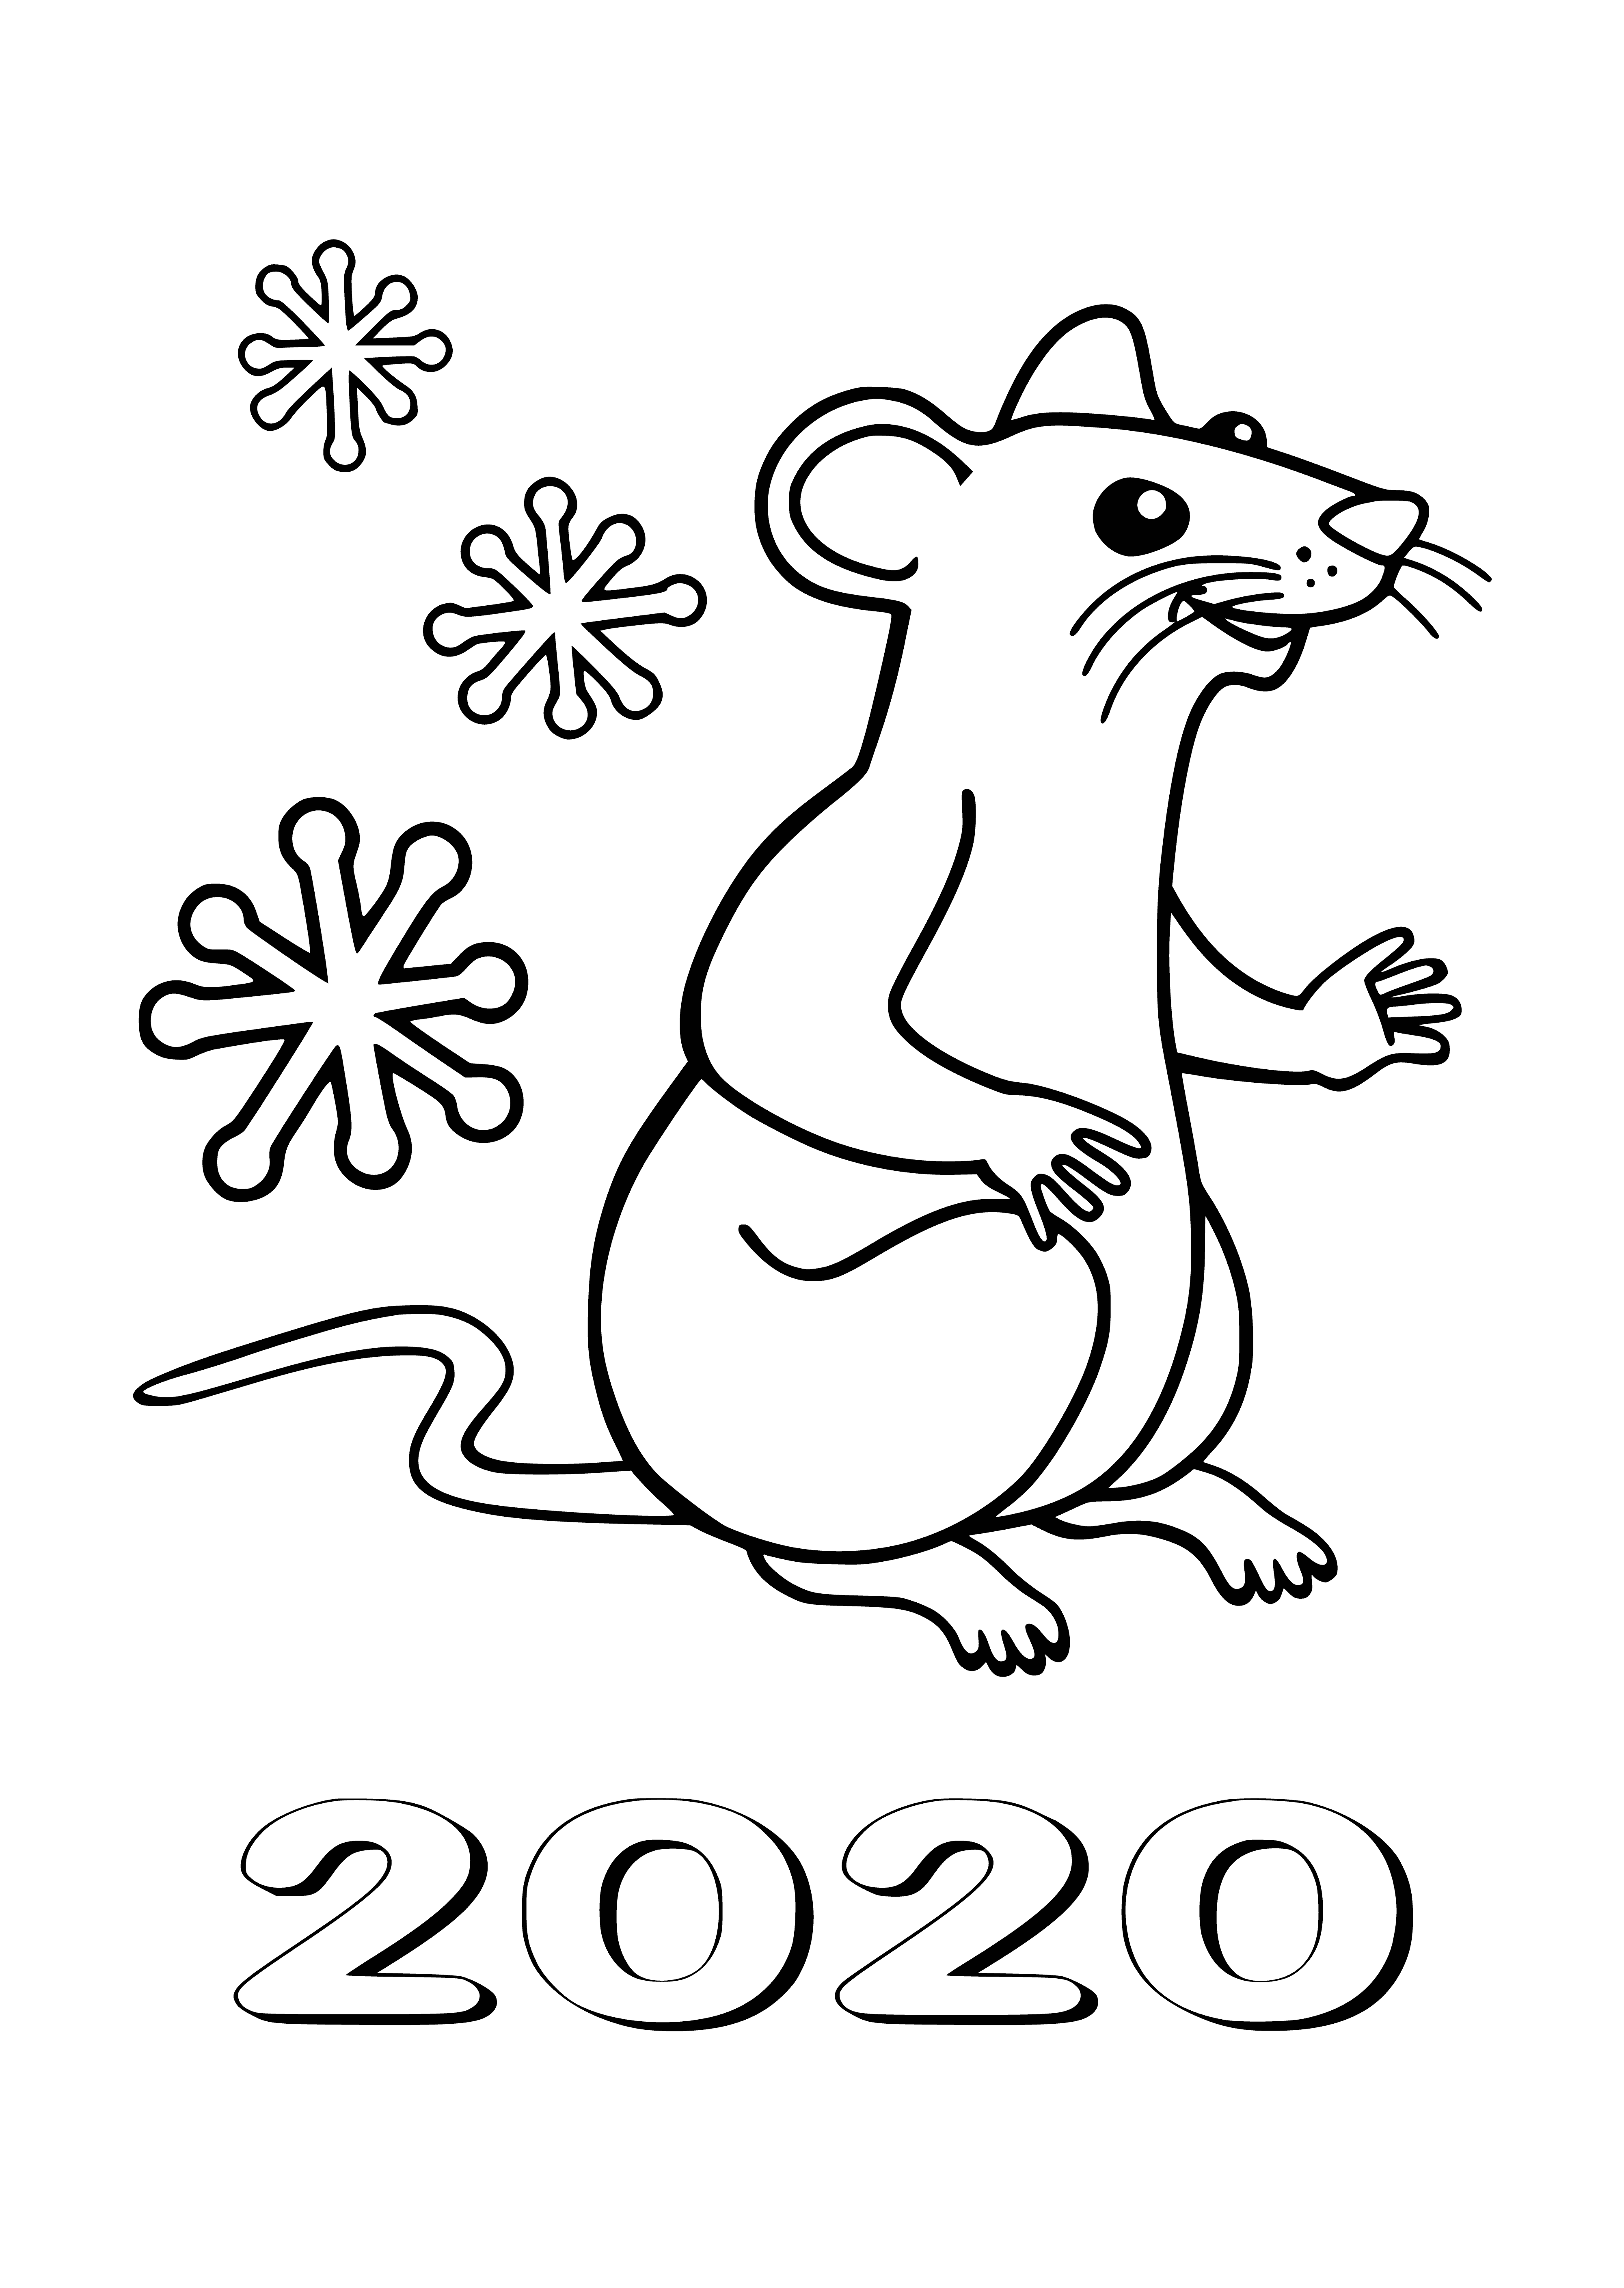 Colorful rat on page symbolizes 